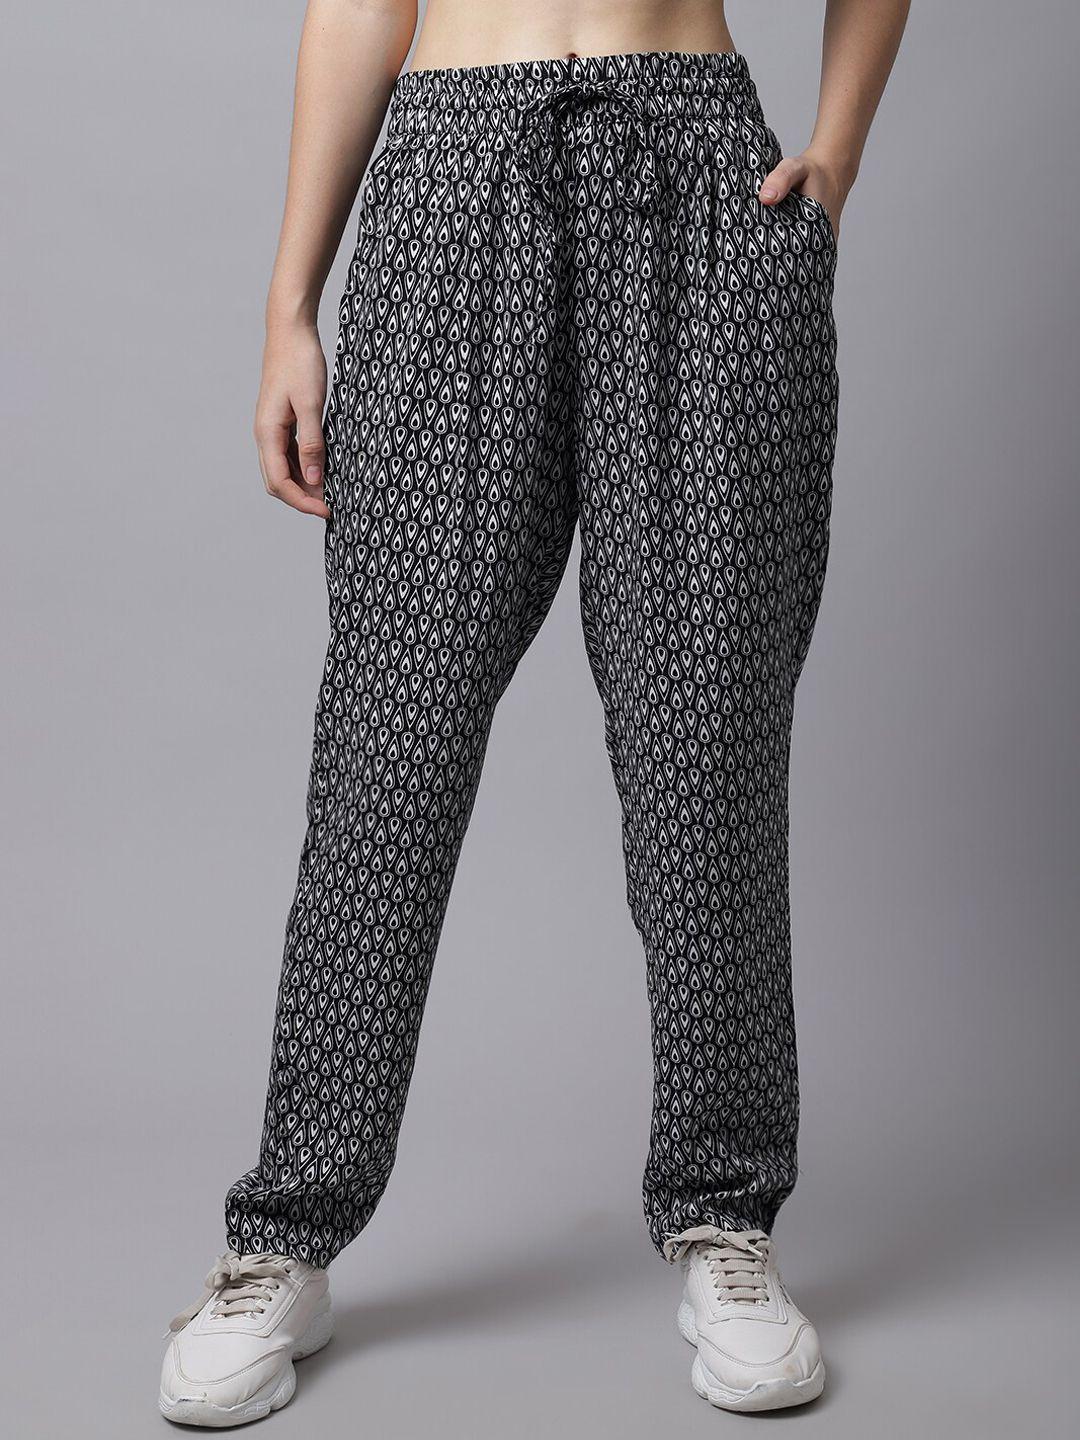 door74-women-printed-relaxed-fit-joggers